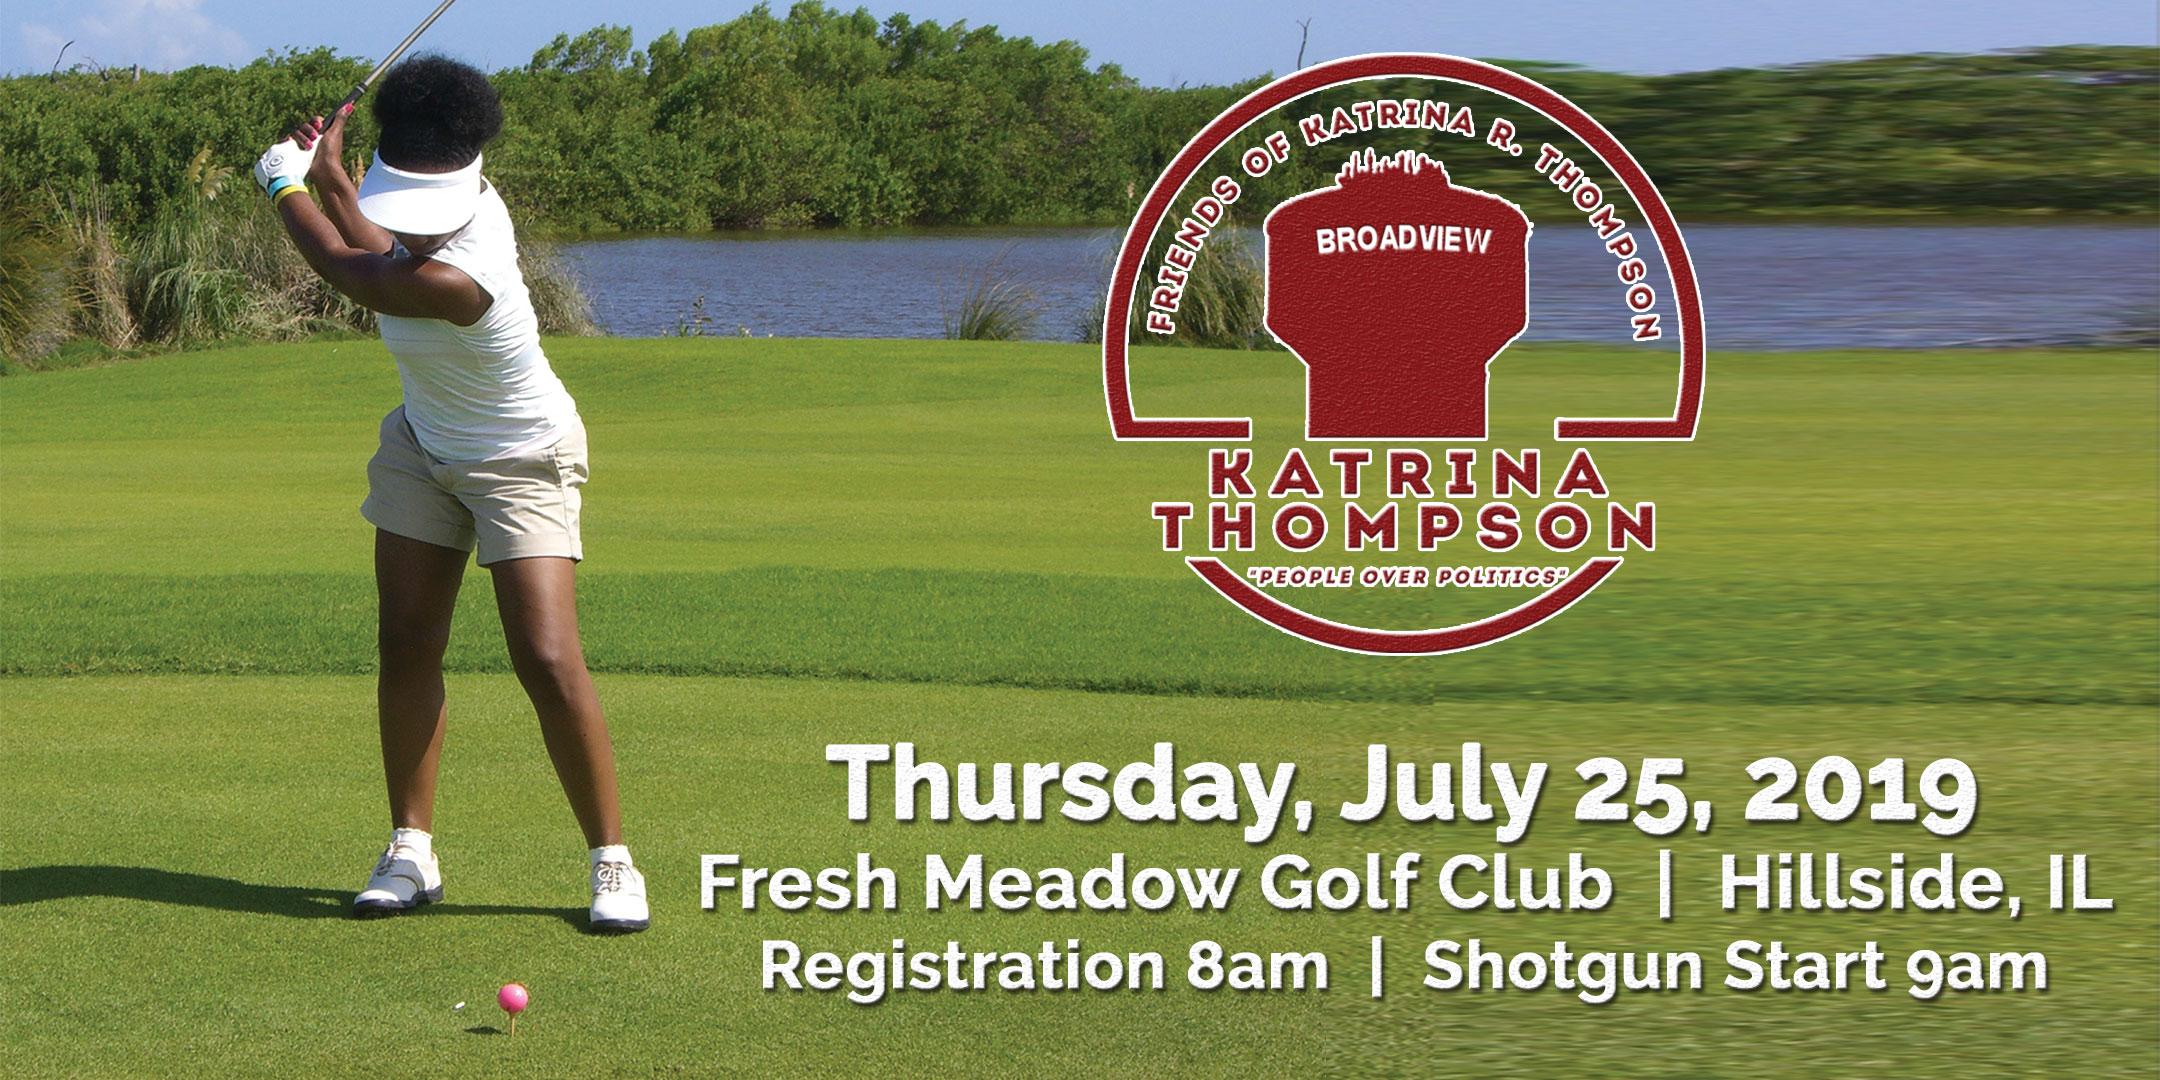 Friends of Katrina Thompson 1st Annual Golf Outing